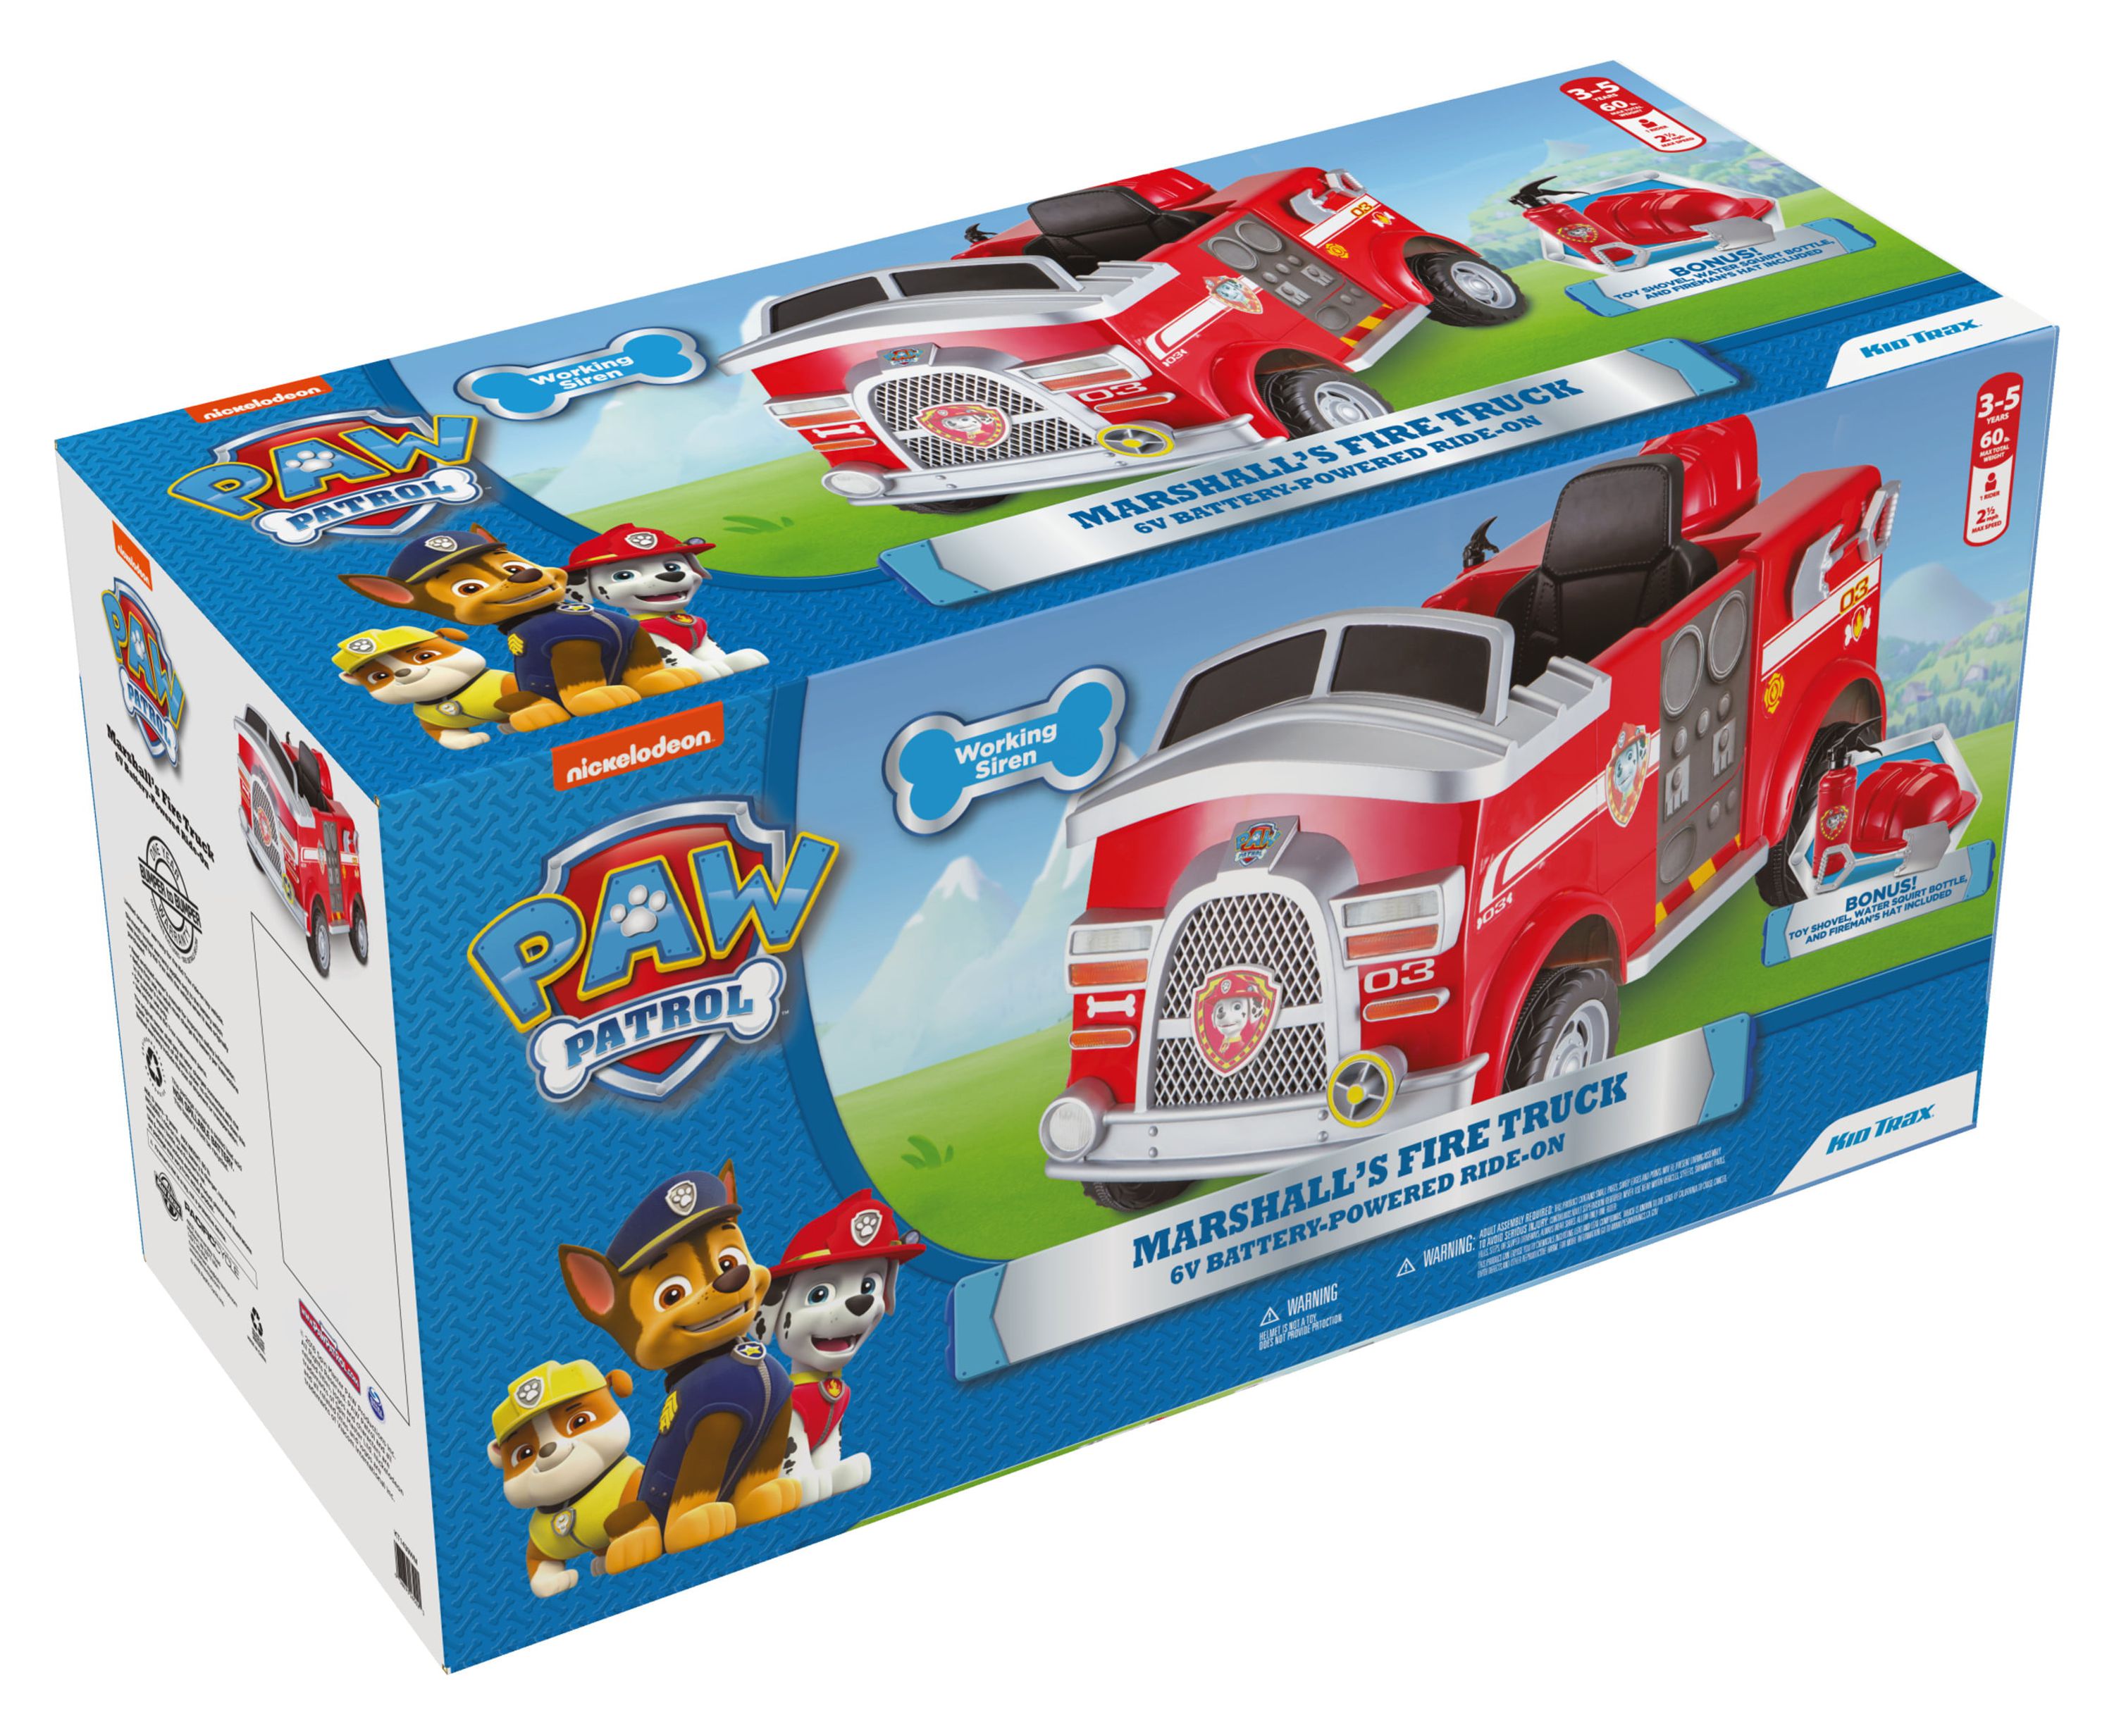 Nickelodeon's PAW Patrol: Marshall Rescue Fire Truck, Ride-On Toy by Kid Trax - image 5 of 10